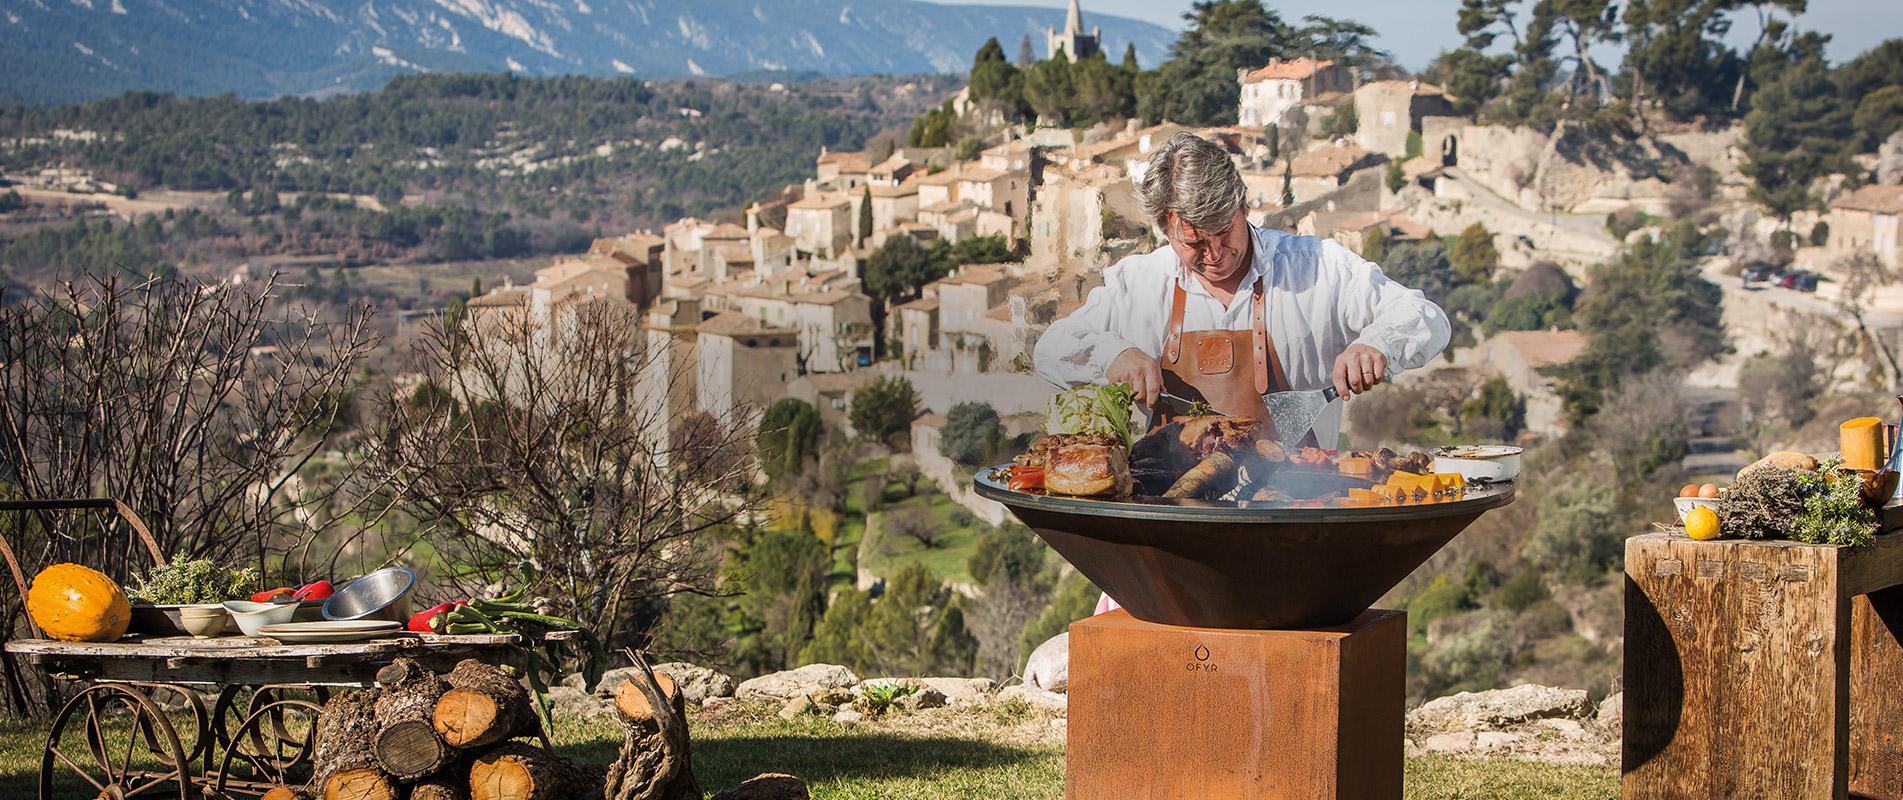 Outdoor cooking: a trend that is here to stay